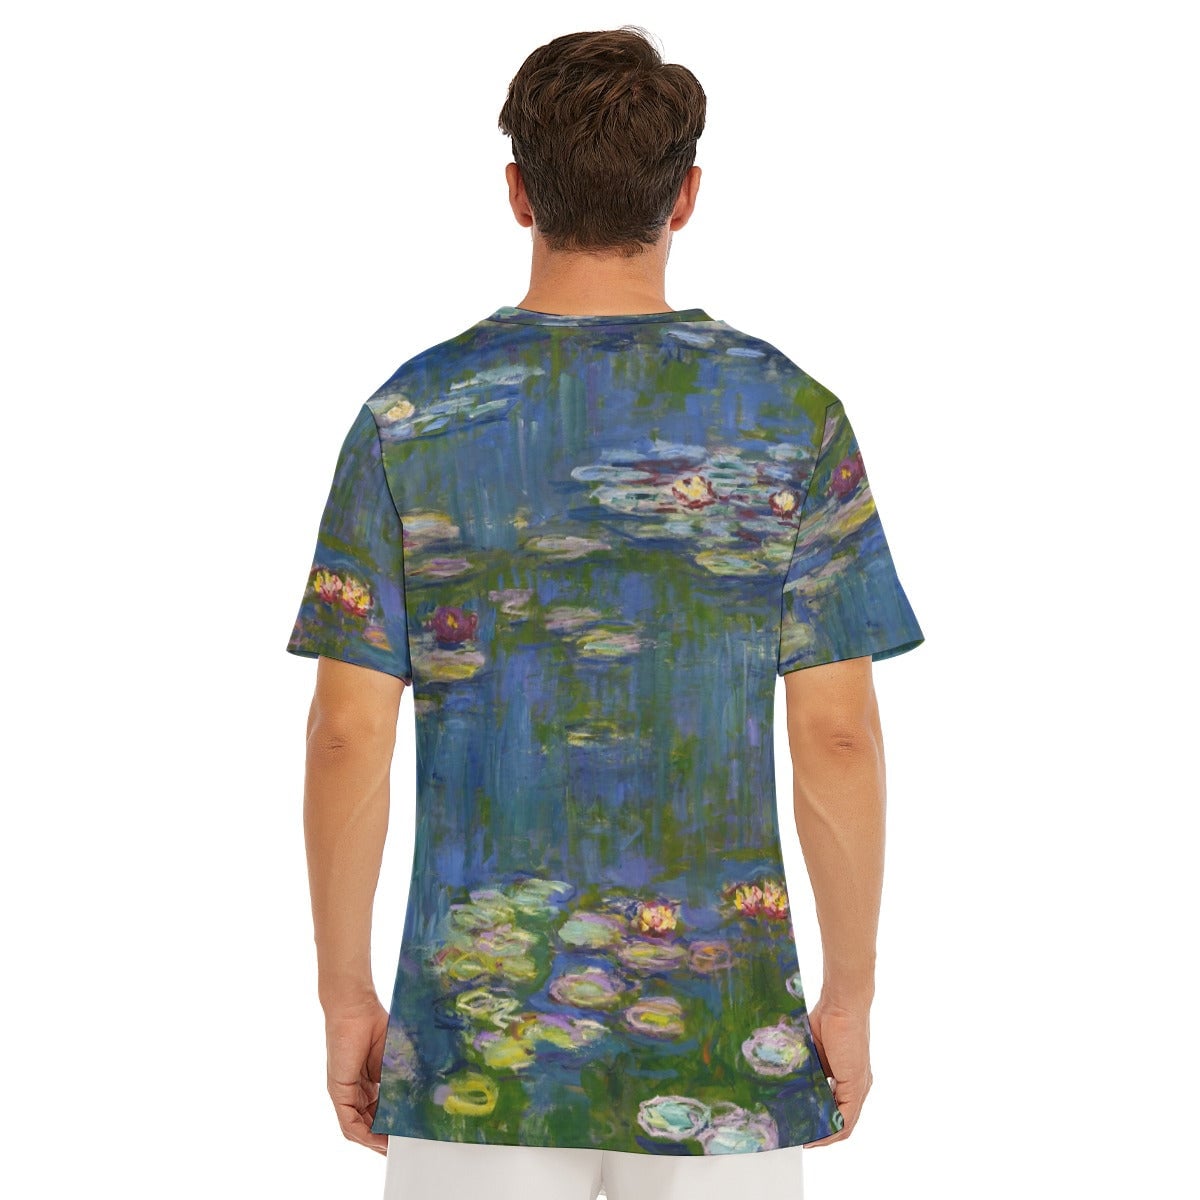 Water Lilies by Claude Monet T-Shirt - Famous Painting Tee